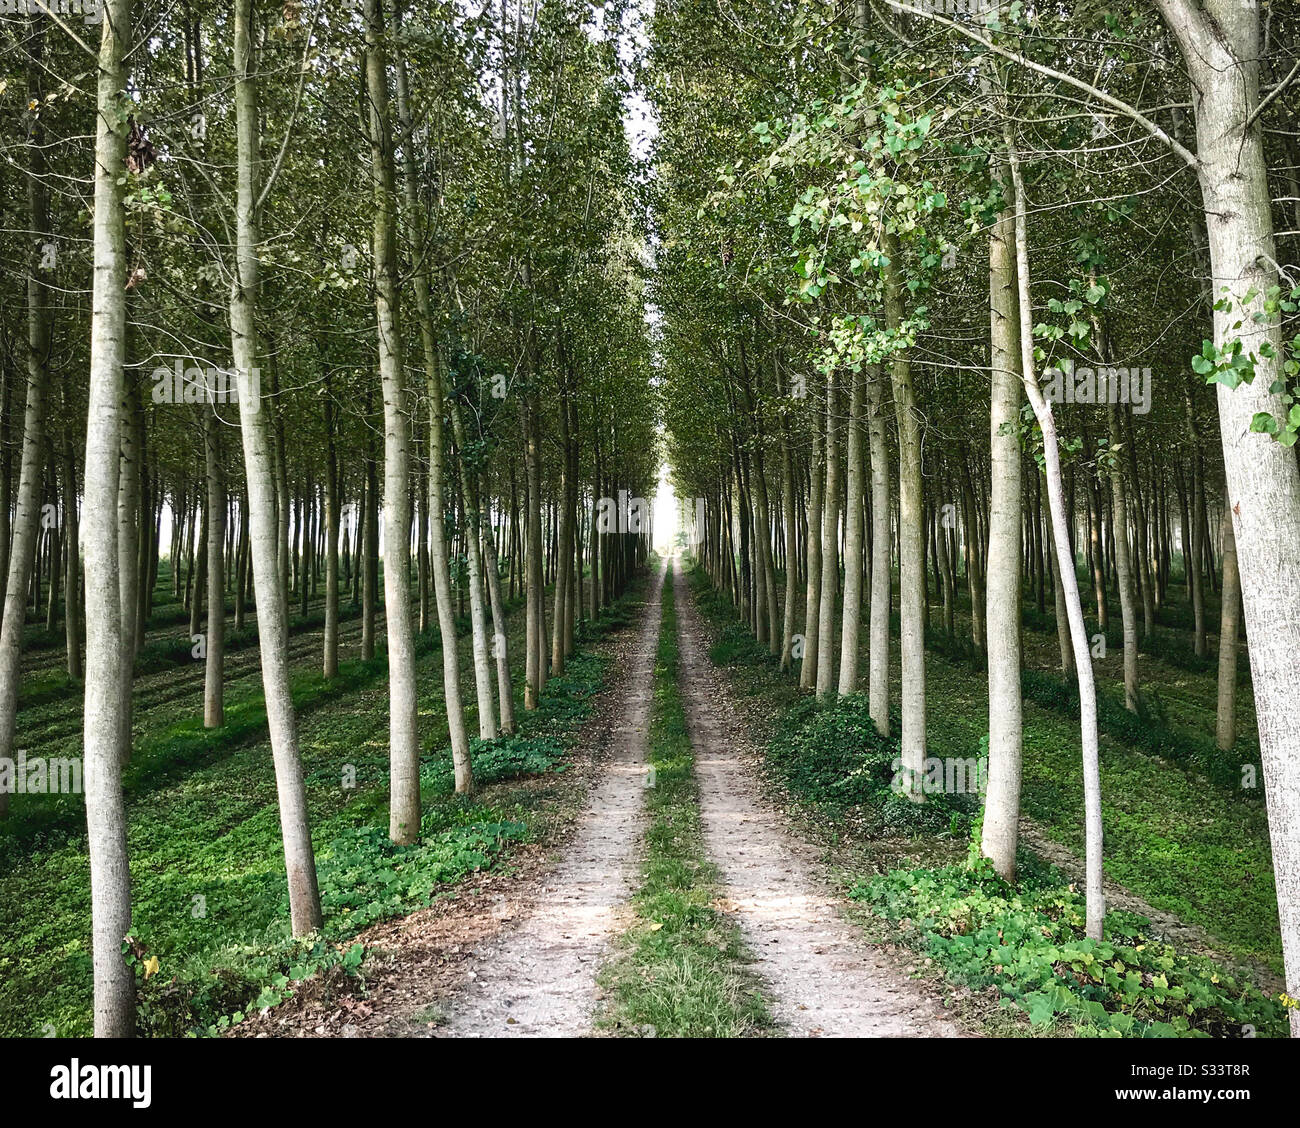 https://c8.alamy.com/comp/S33T8R/tall-skinny-white-trunk-trees-with-green-leaves-lined-up-with-a-dirt-road-down-the-middle-S33T8R.jpg